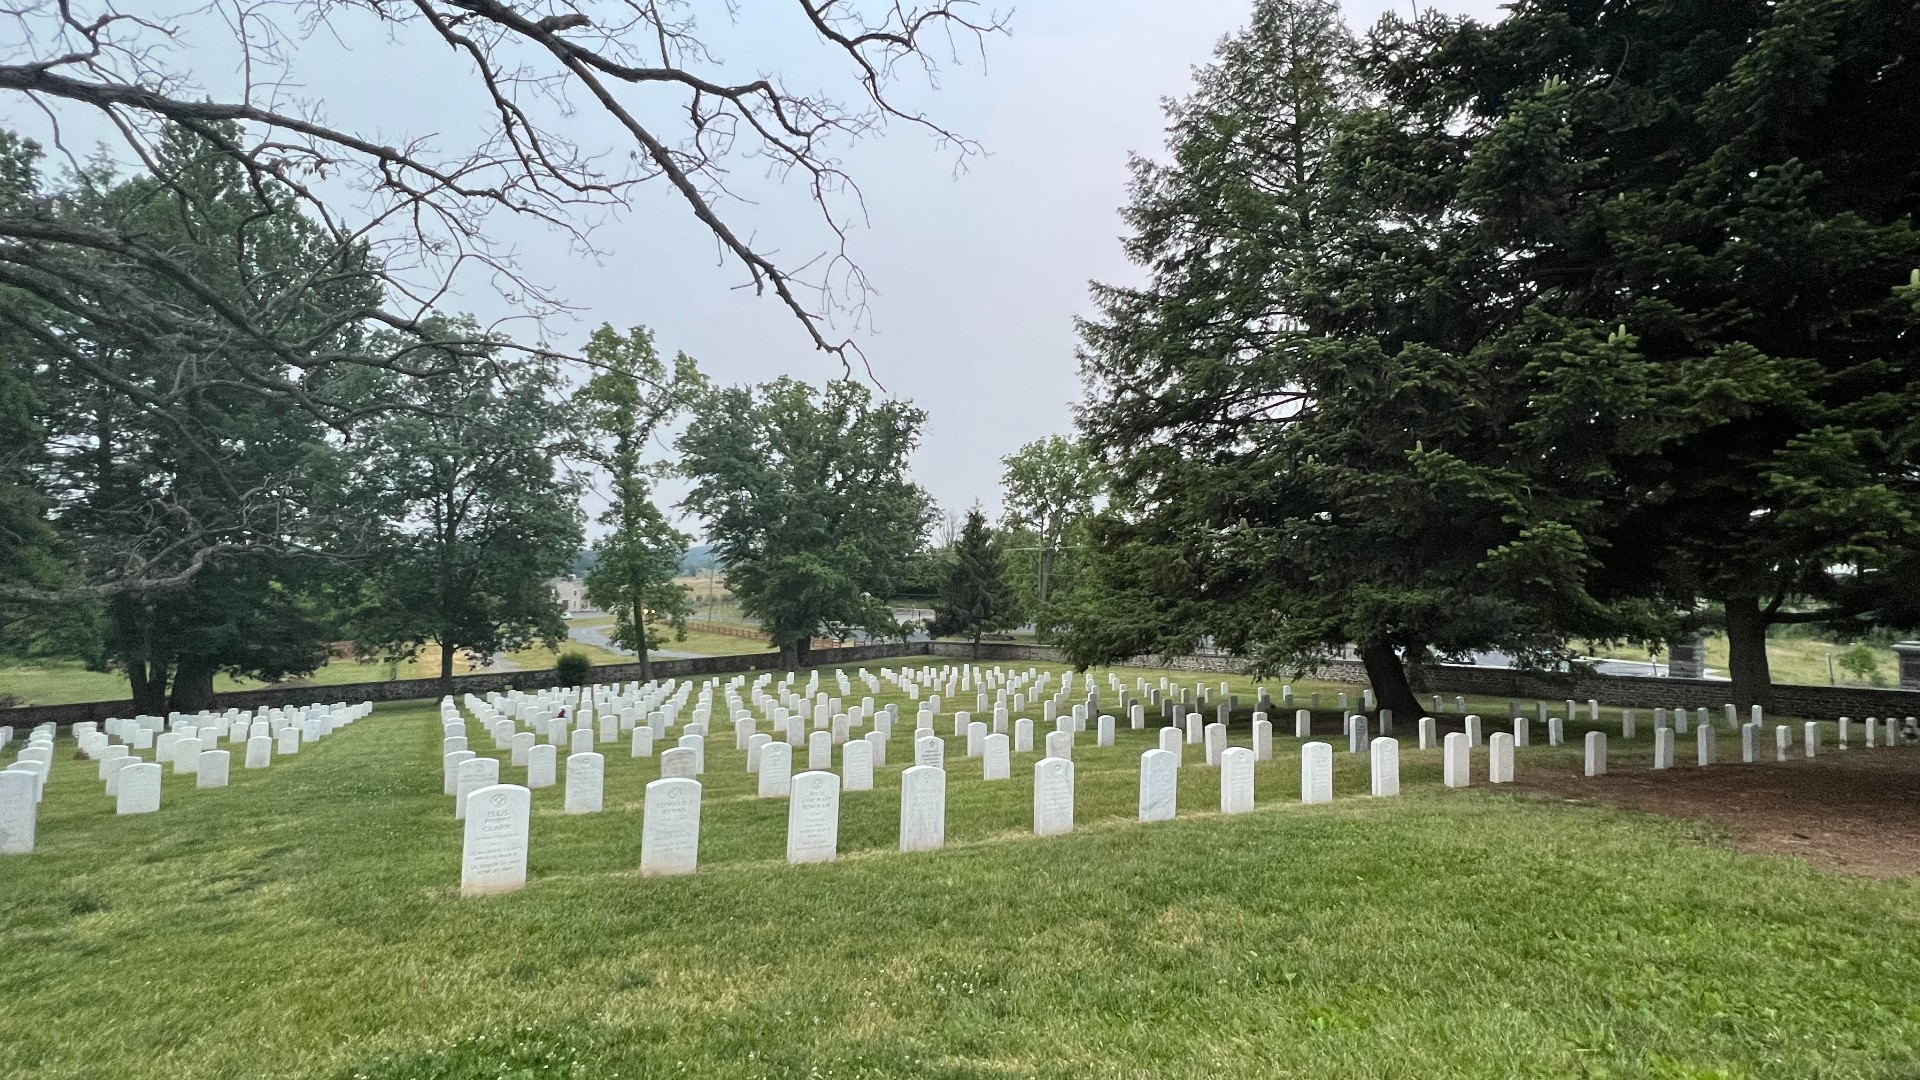 The Eisenhower National Historic Site is commemorating the 79th anniversary of D-Day with a walking tour of the Gettysburg National Cemetery.